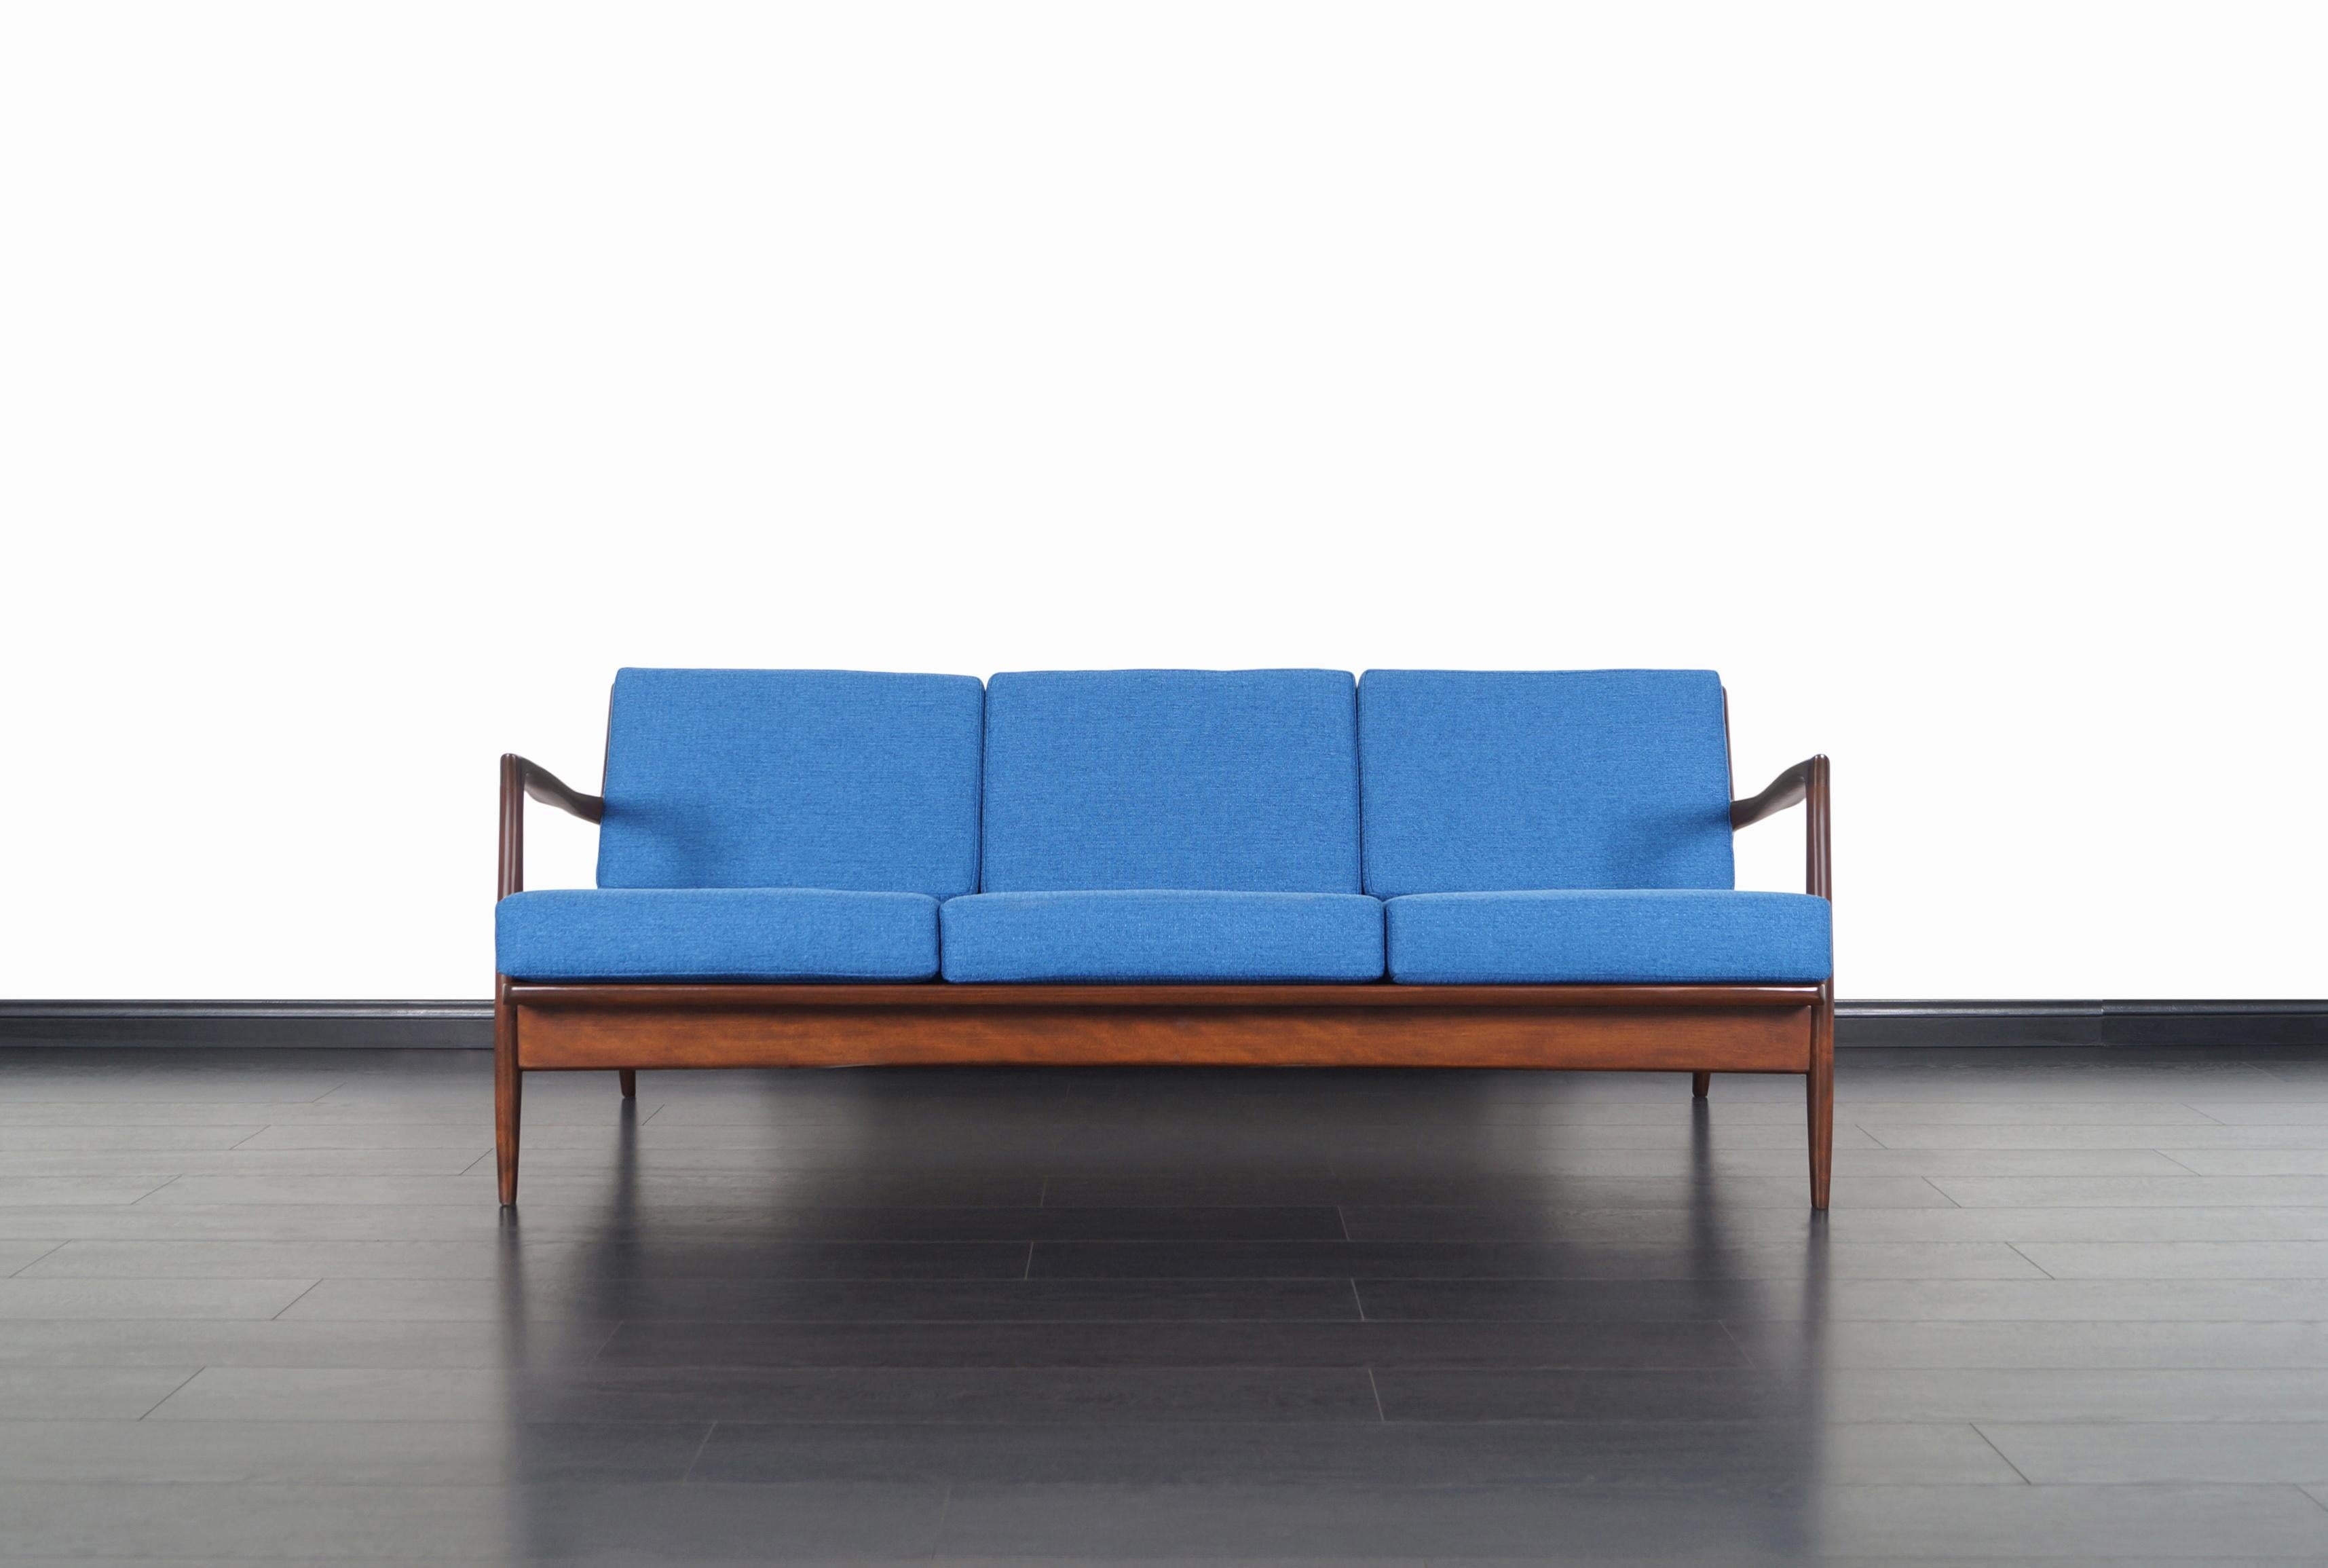 Stunning Danish modern sofa designed by architect and furniture designer Ib Kofod-Larsen for Selig in Denmark, circa 1960s. This iconic sofa features a solid walnut stained beech frame with sculptural armrests and slatted backrest. Its eye-catching